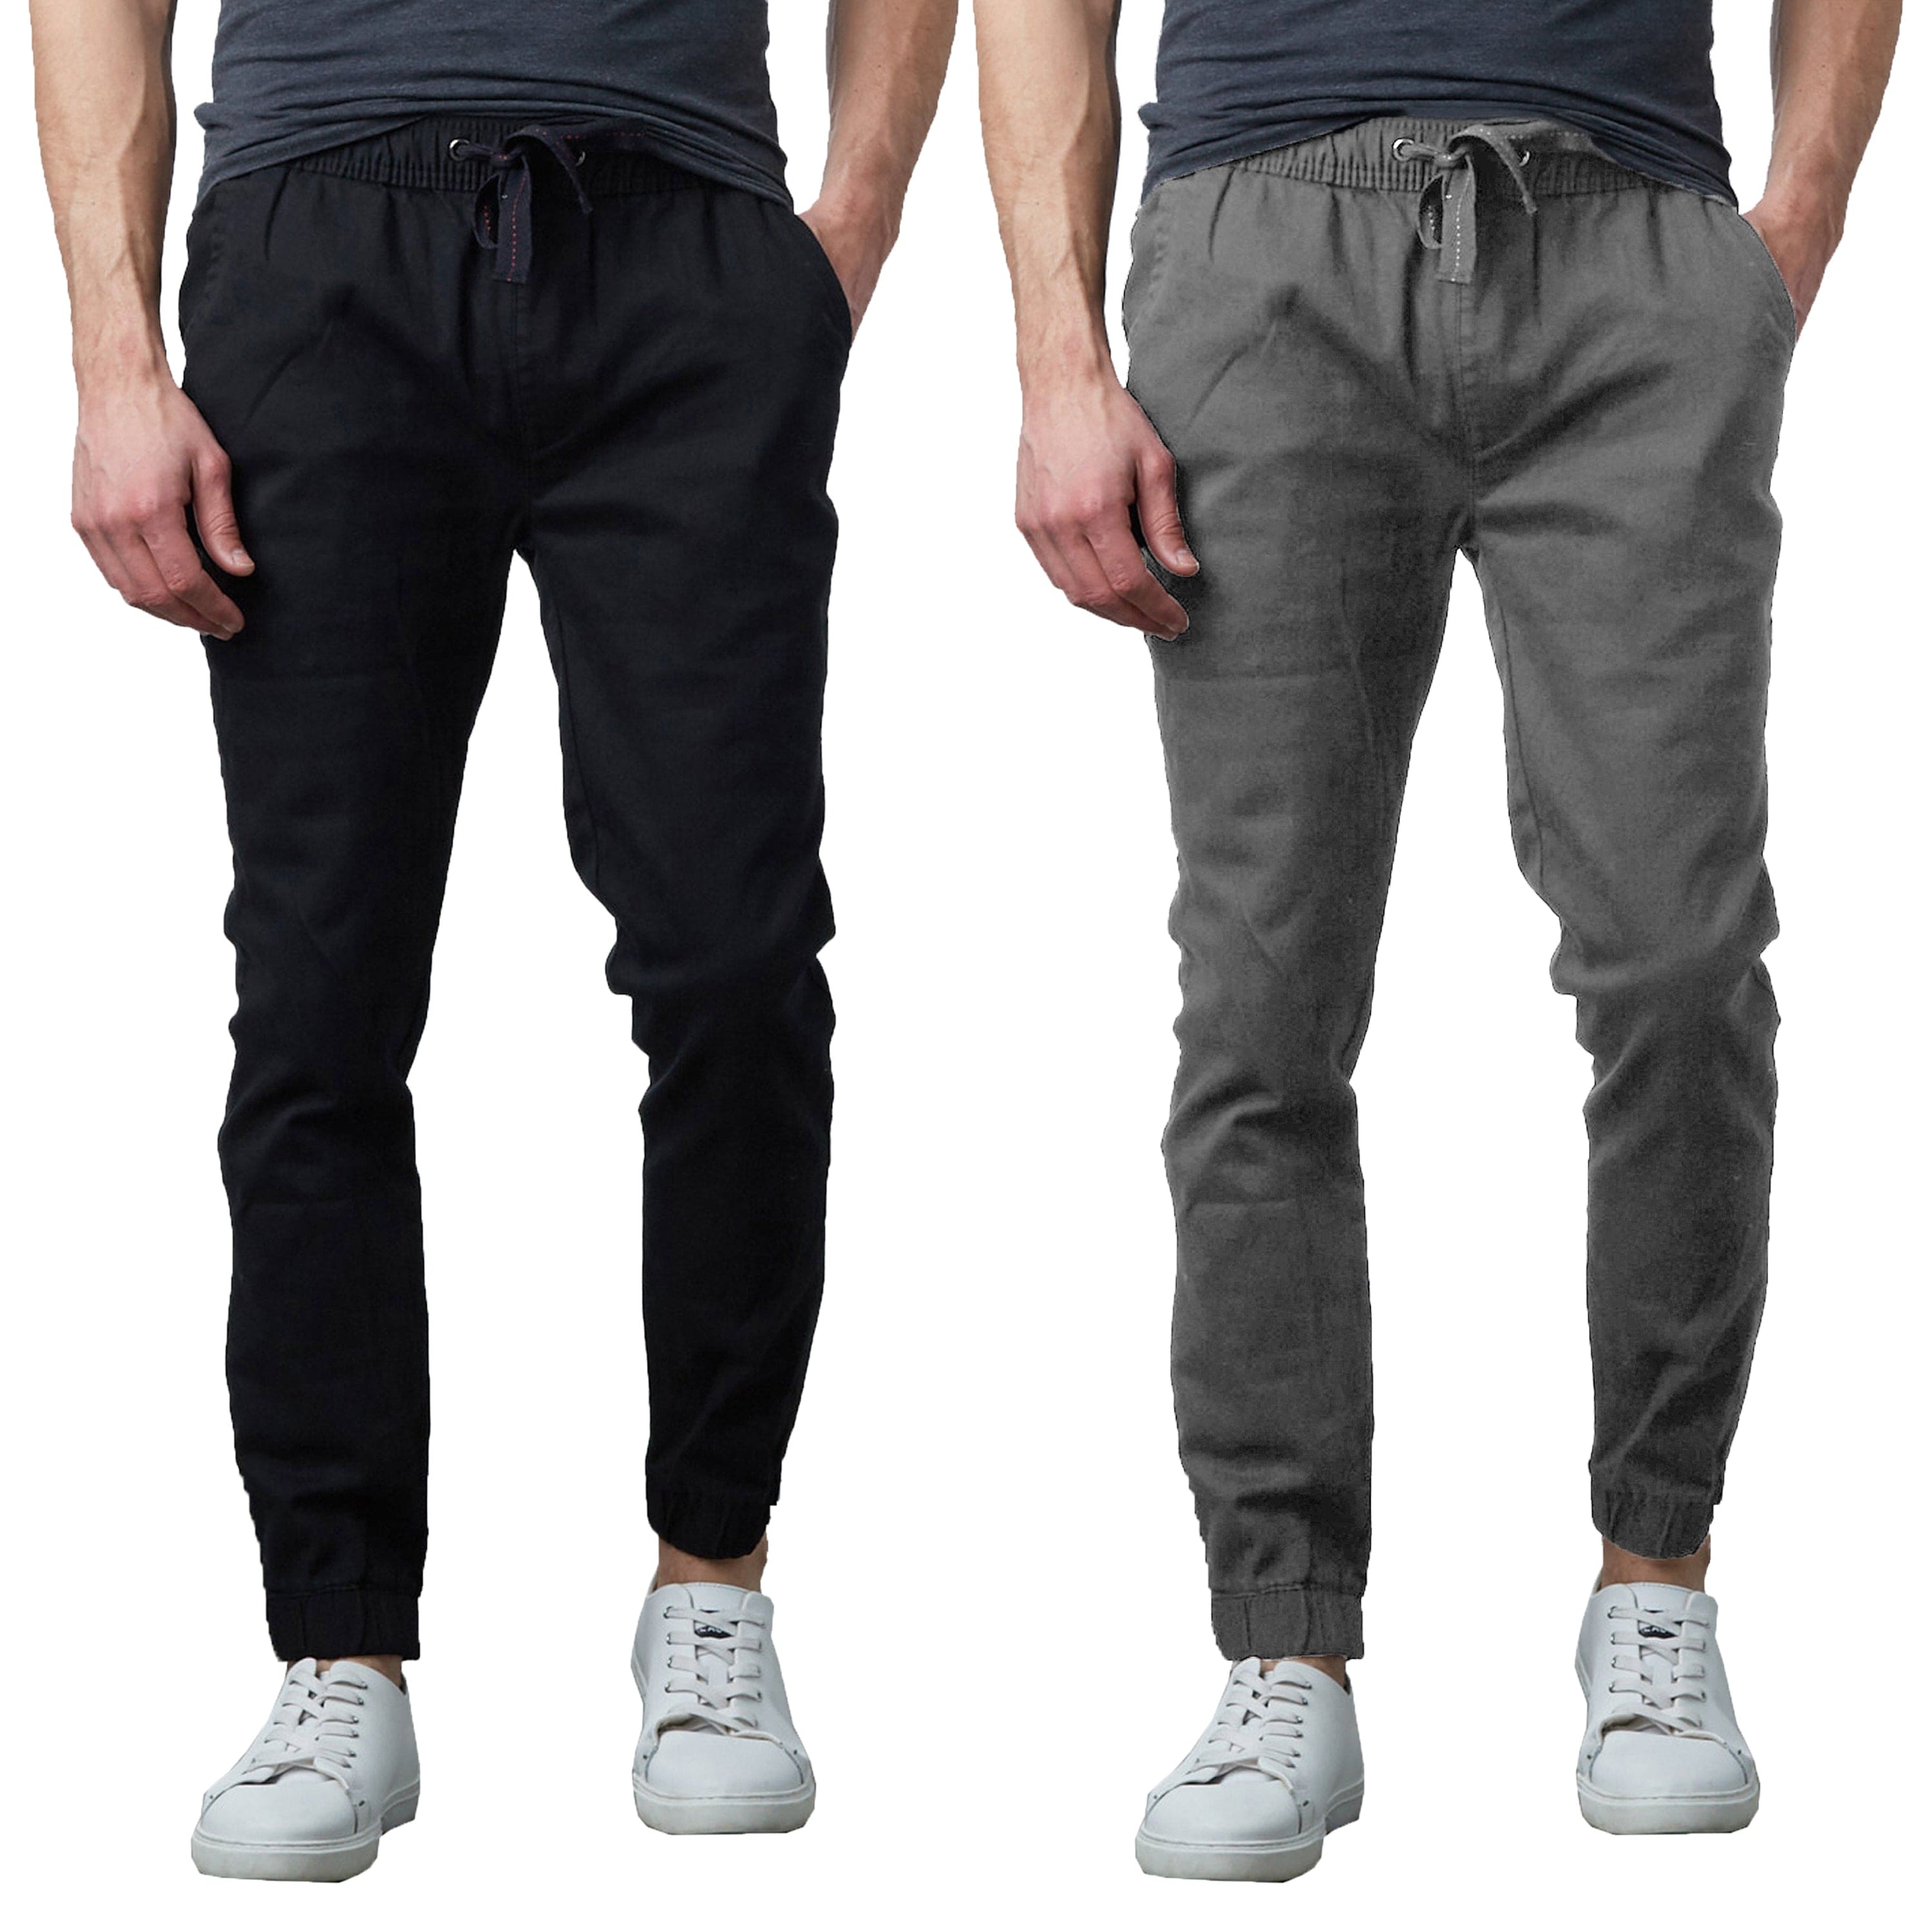 Men's 2-Pack Classic Cotton Stretch Twill Jogger Pants